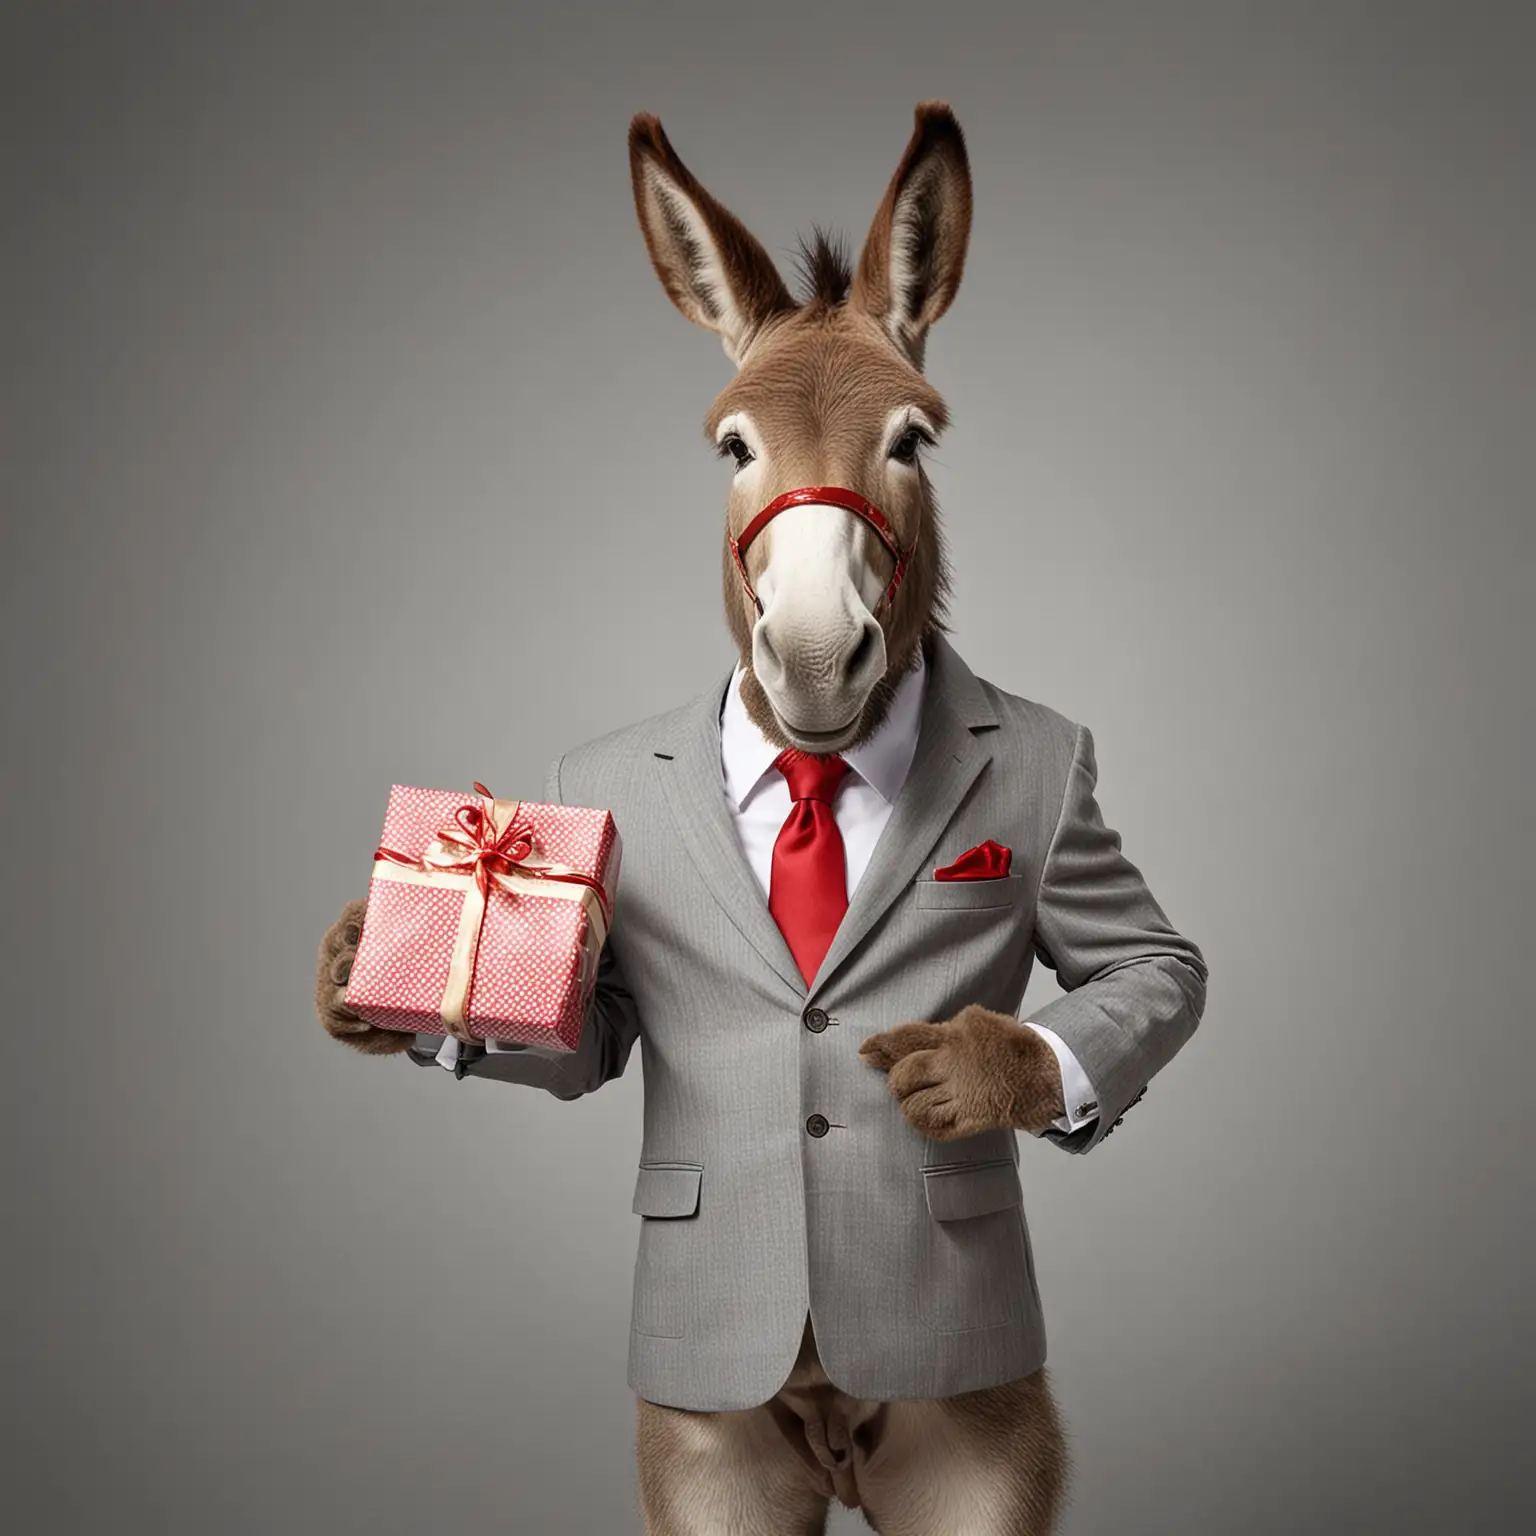 Formally Dressed Donkey Presents a Gift